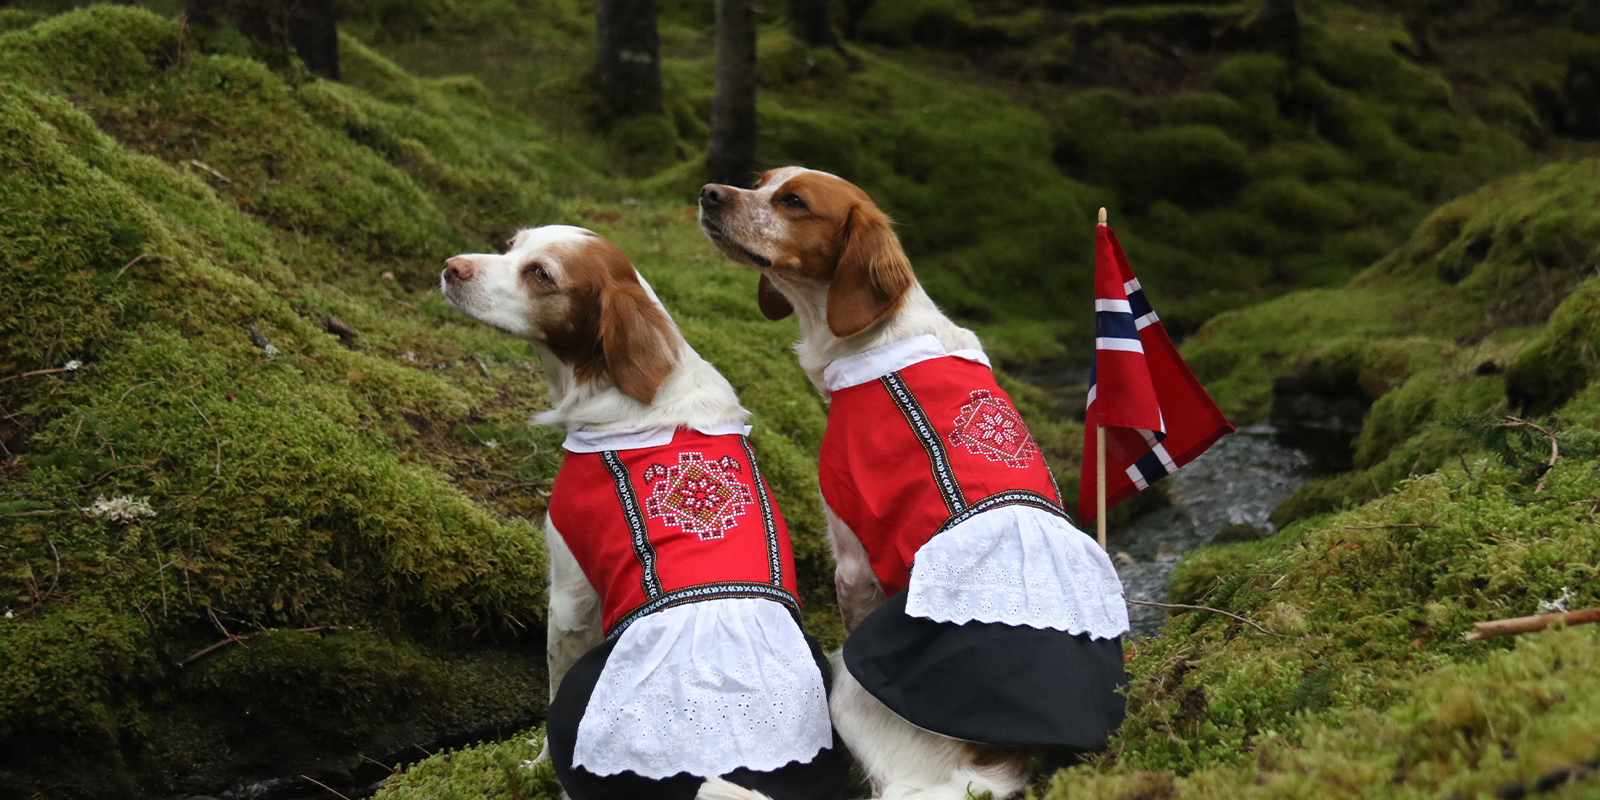 Dogs of Norway